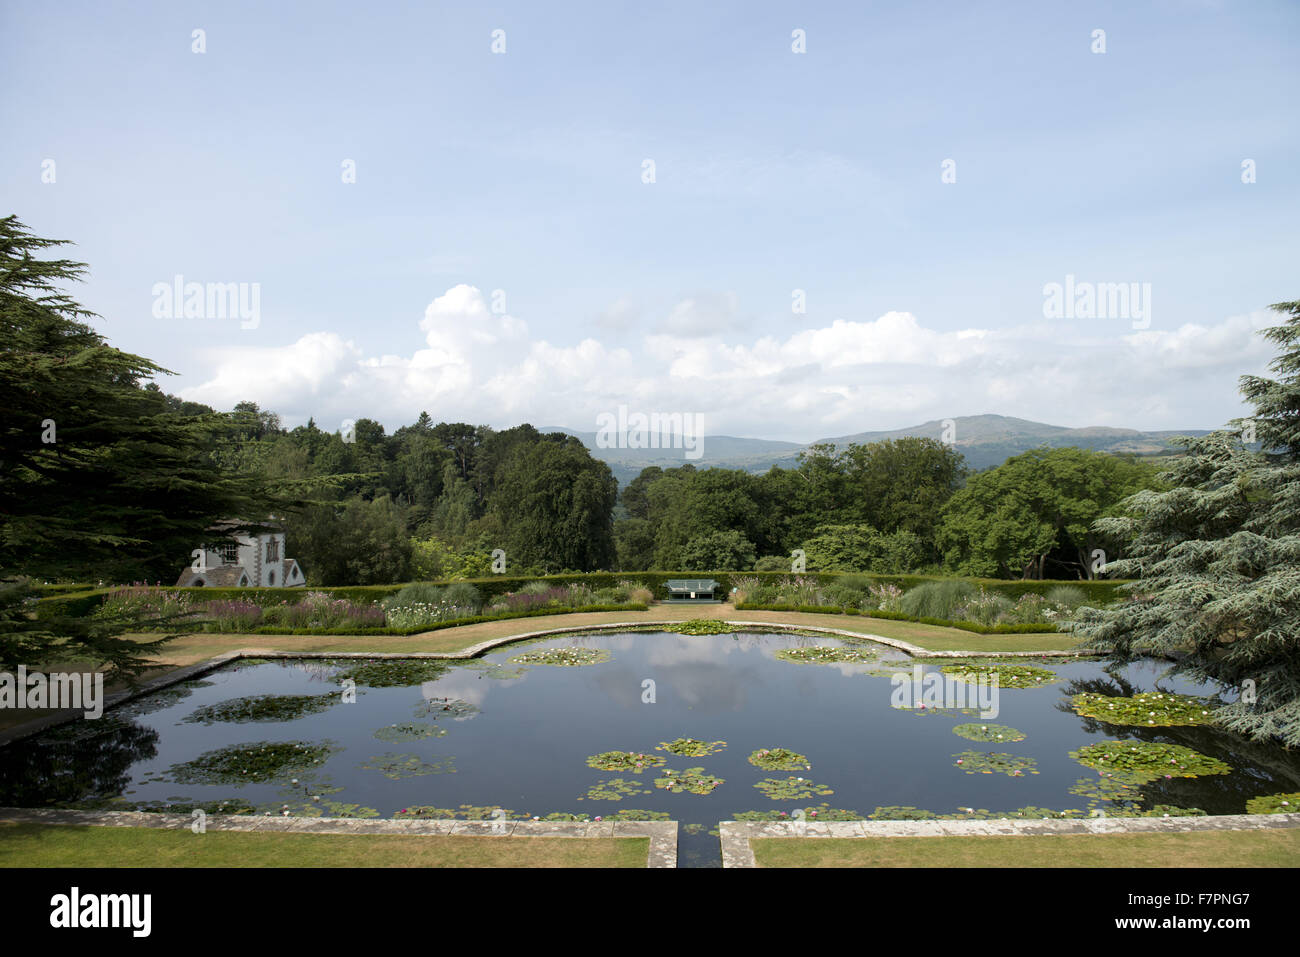 View over the Lily Pond at Bodnant Garden, Clwyd, Wales. Created by five generations of one family, Bodnant sits perfectly within its dramatic North Wales landscape. Stock Photo